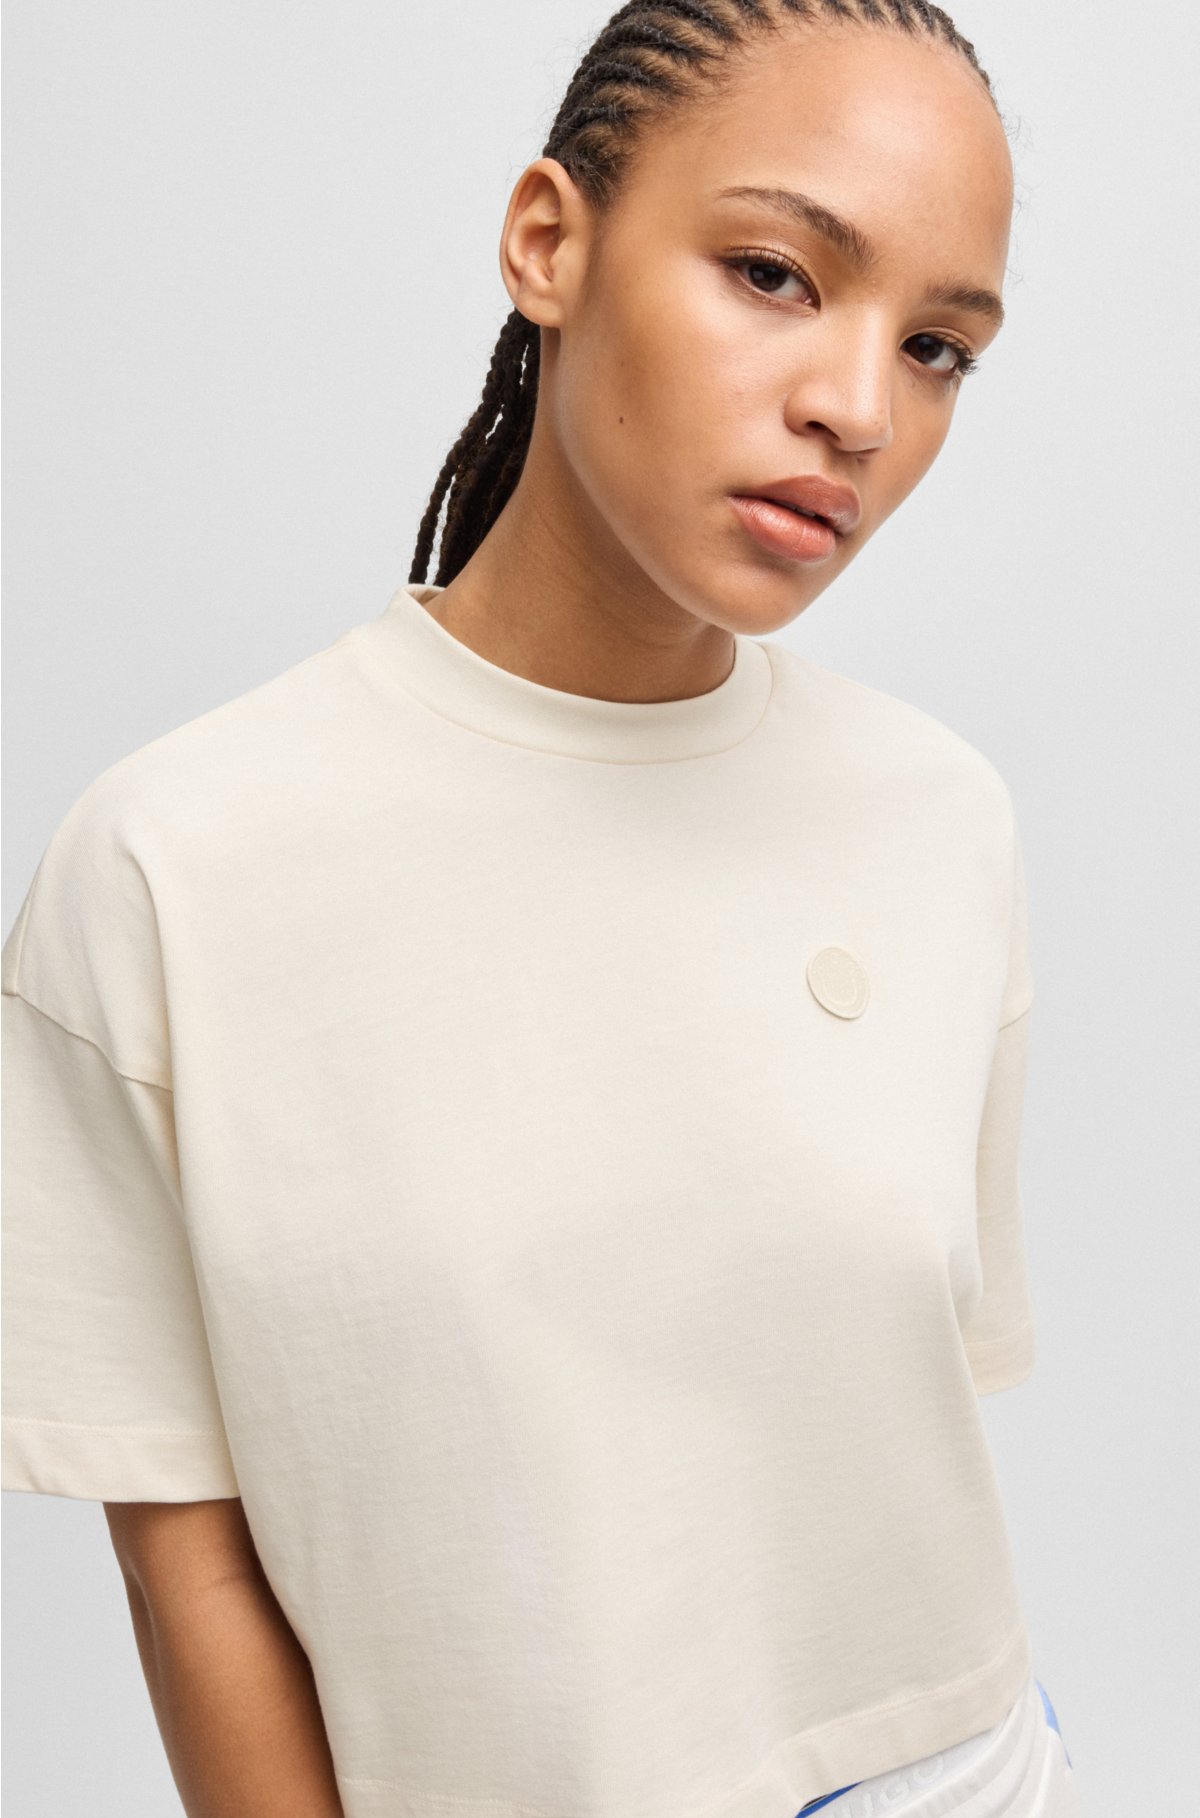 Cropped T-shirt in cotton jersey with logo badge, Natural